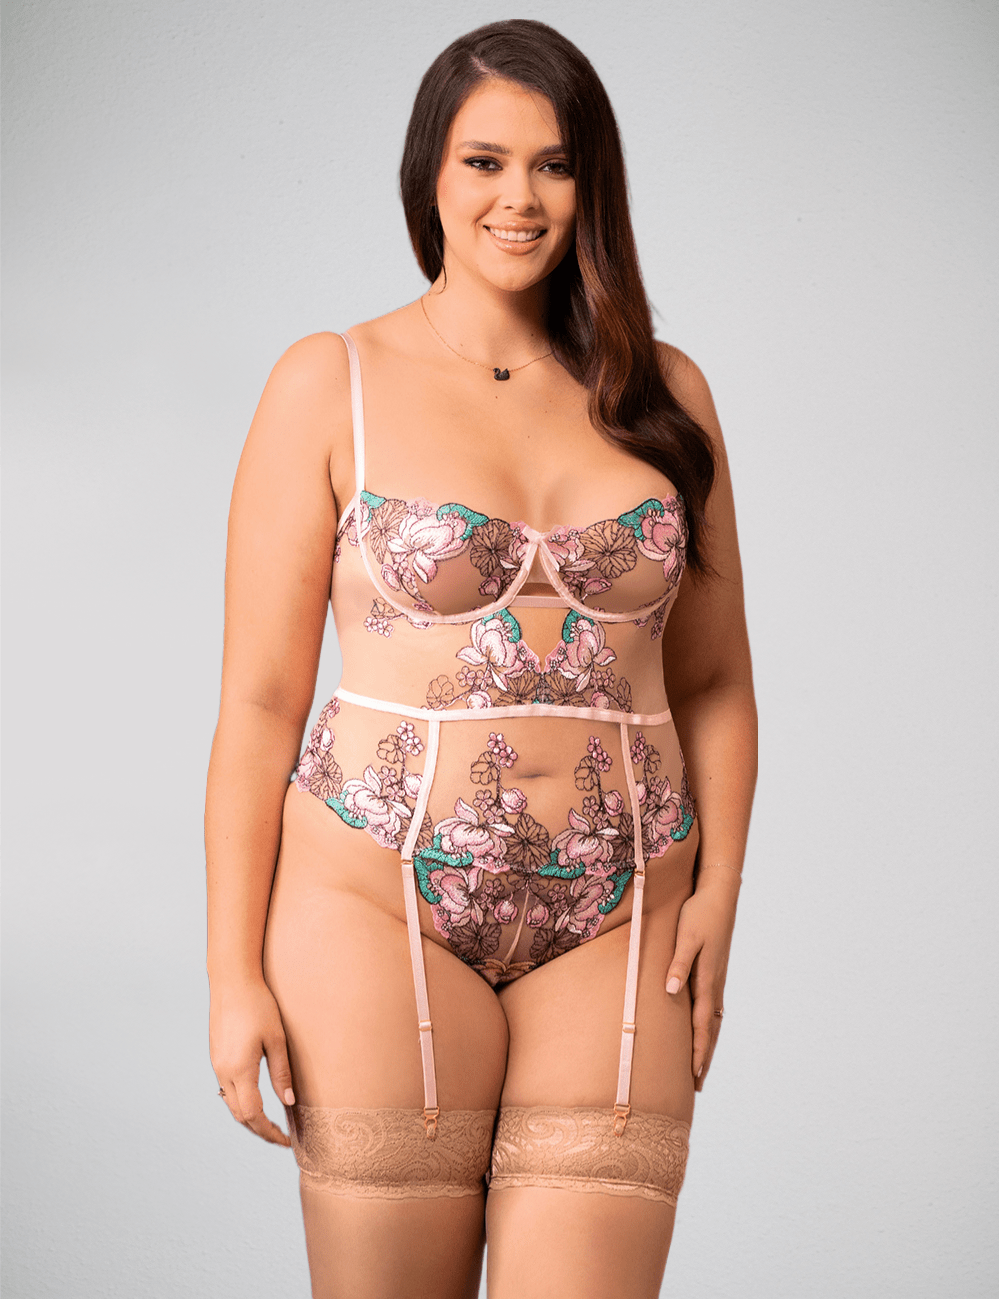 Scandals Sexy Colourful Floral Open Crotch Pink Teddy Lingerie Bodies & Teddies Scandals Lingerie 